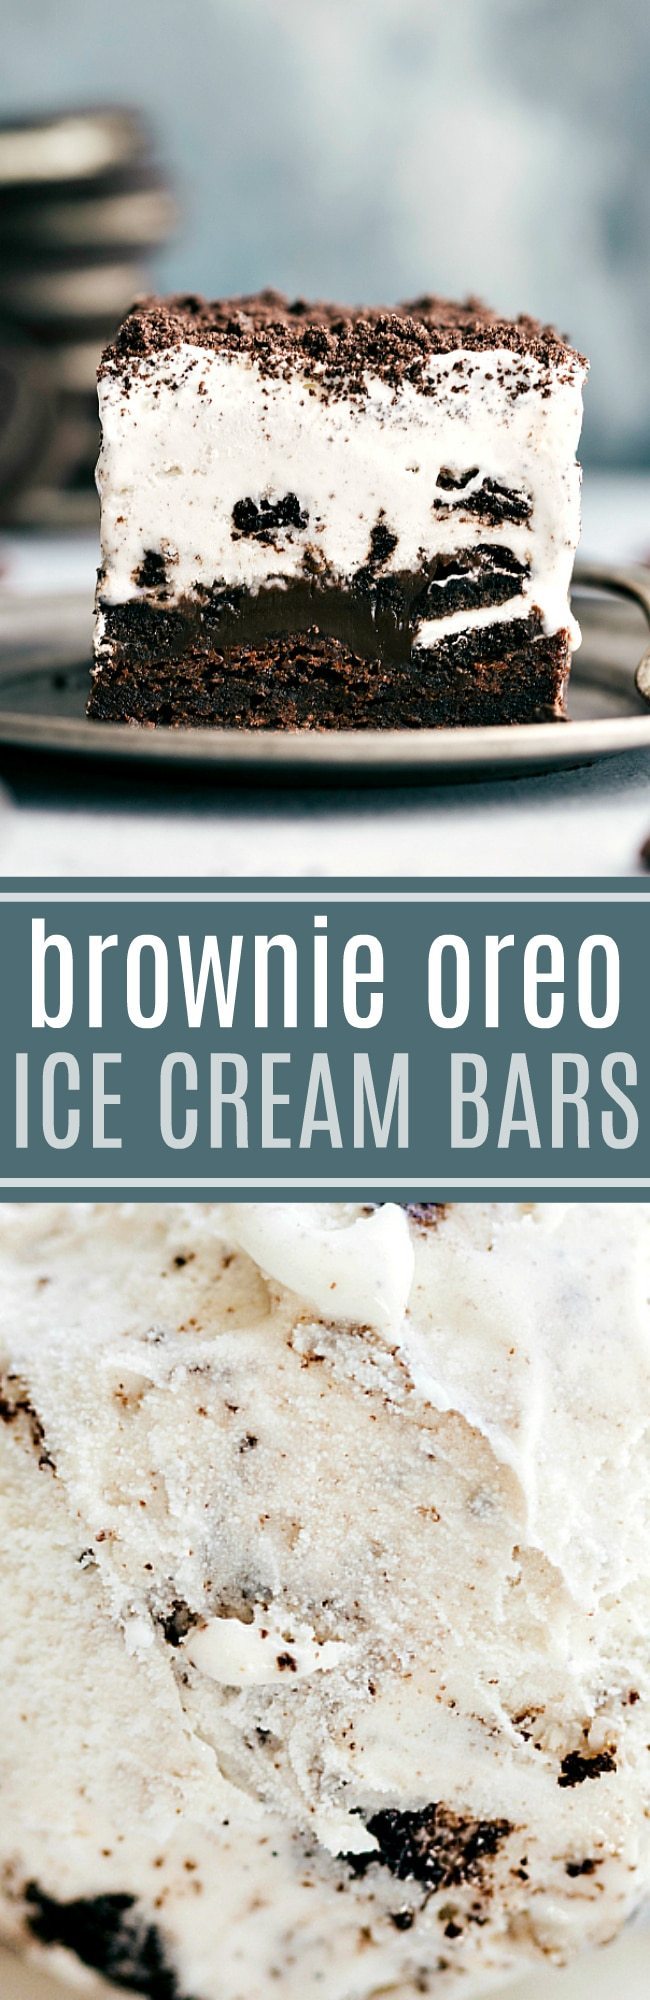 BROWNIE OREO ICE CREAM BARS!! Brownie-bottomed, oreo-topped, hot-fudge smothered, ice cream-covered dessert bars. So easy to make, perfect for a hot summer day, and absolutely delicious! chelseasmessyapron.com